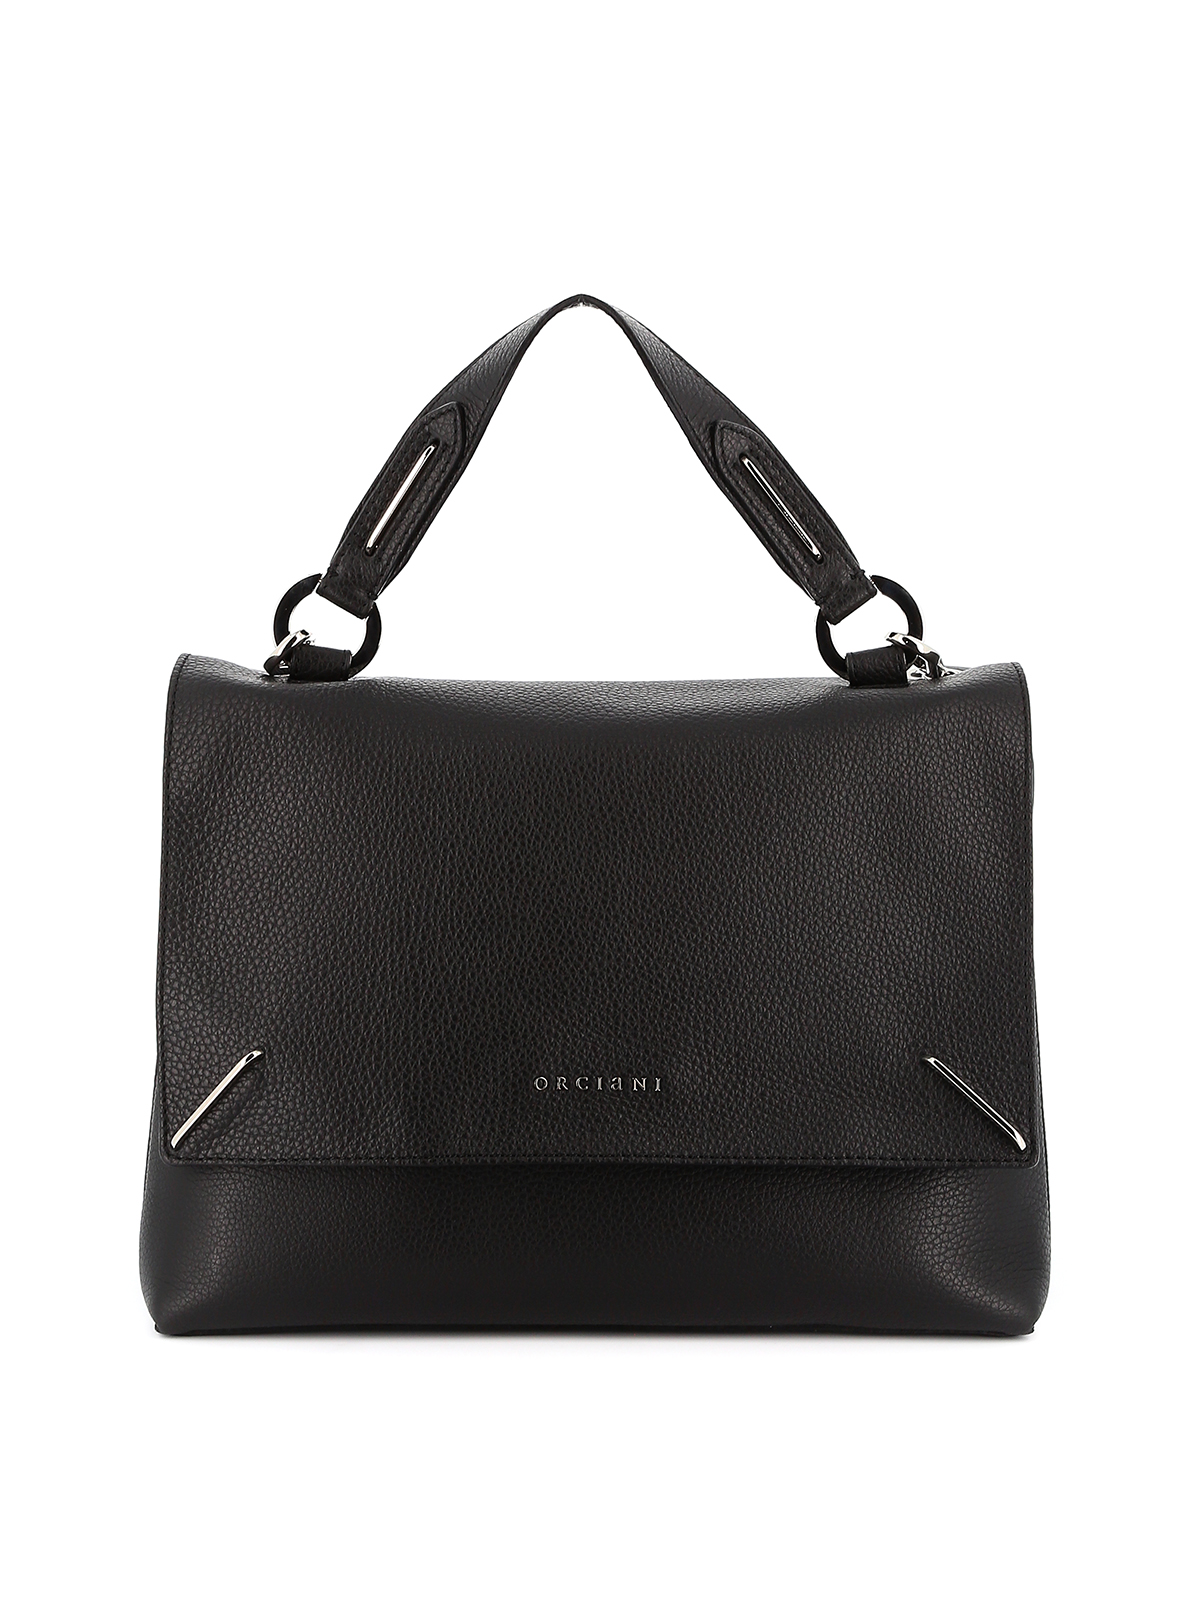 Orciani Kate Leather Small Shoulder Bag In Black